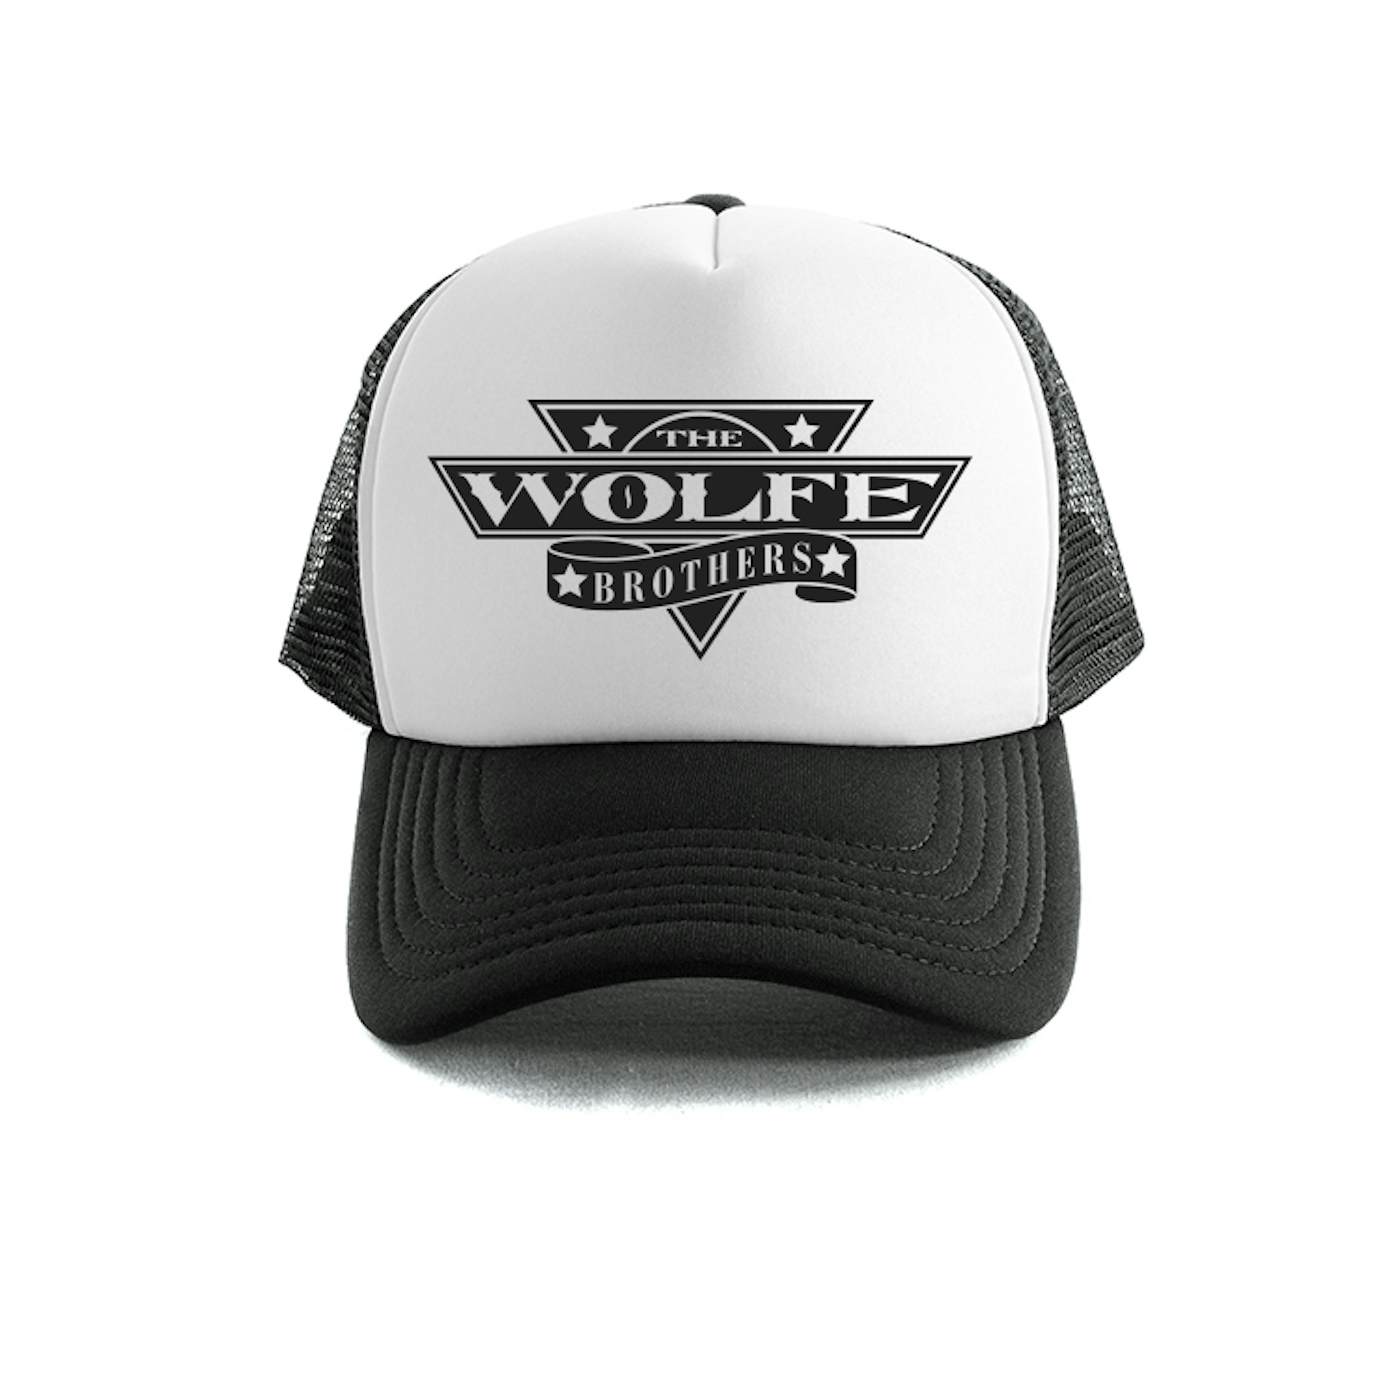 The Wolfe Brothers - Black Trucker Cap